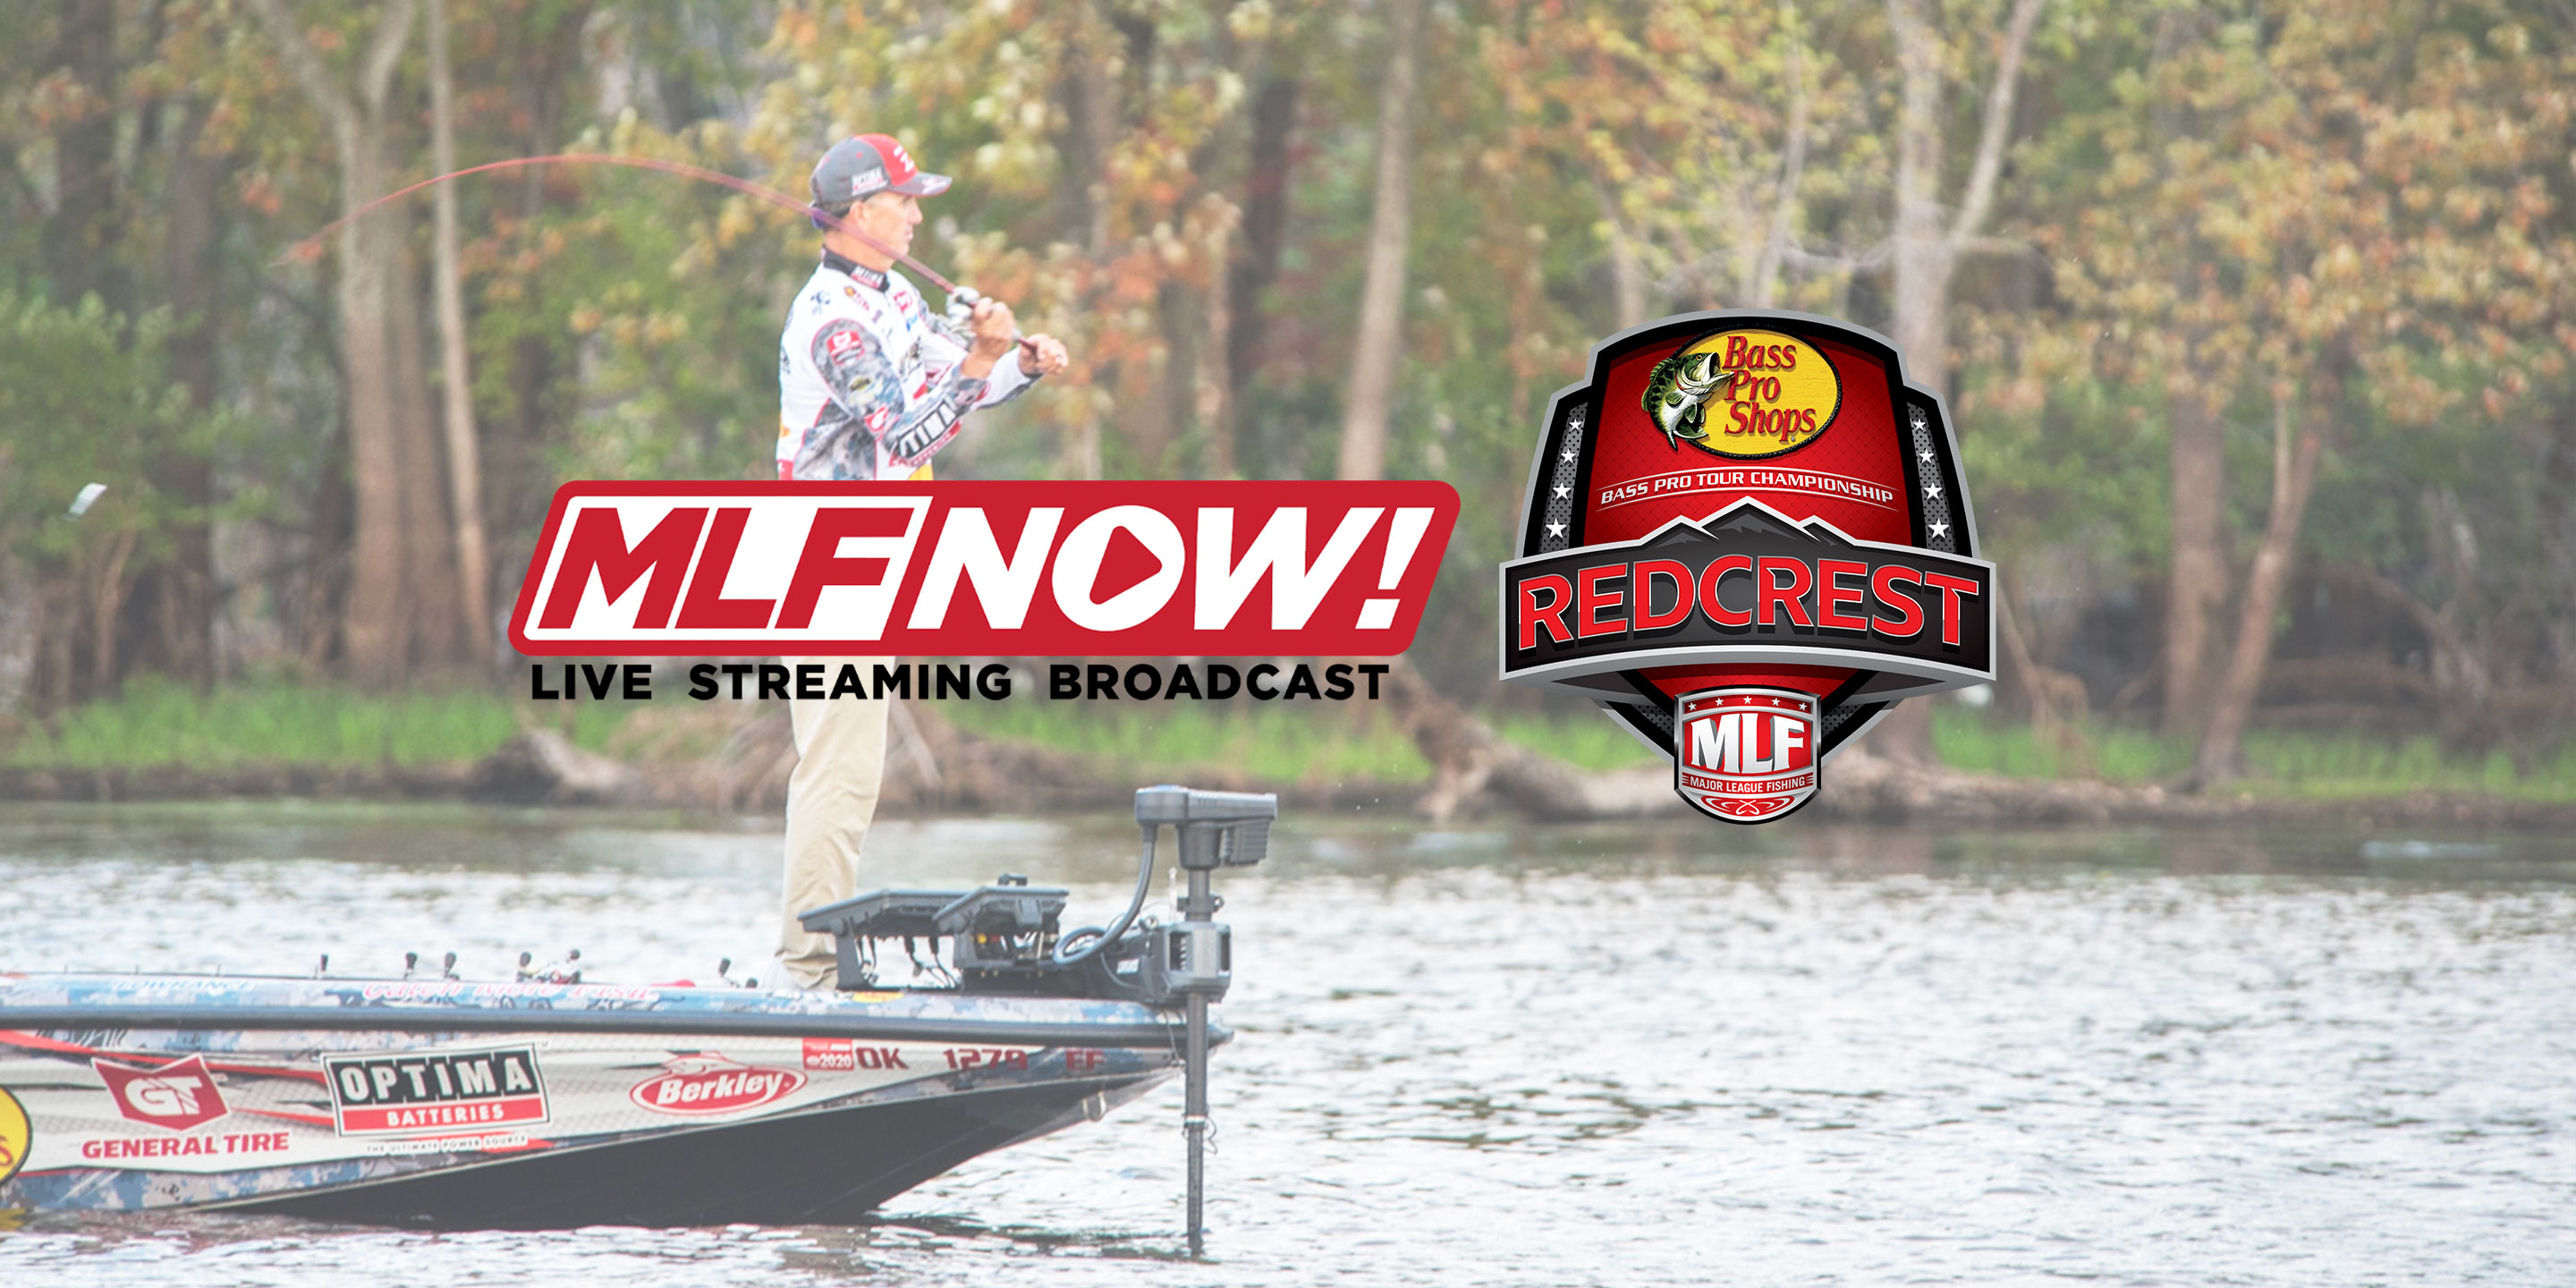 REDCREST Knockout Round 1 MLF NOW! Live Stream August 23, 2019